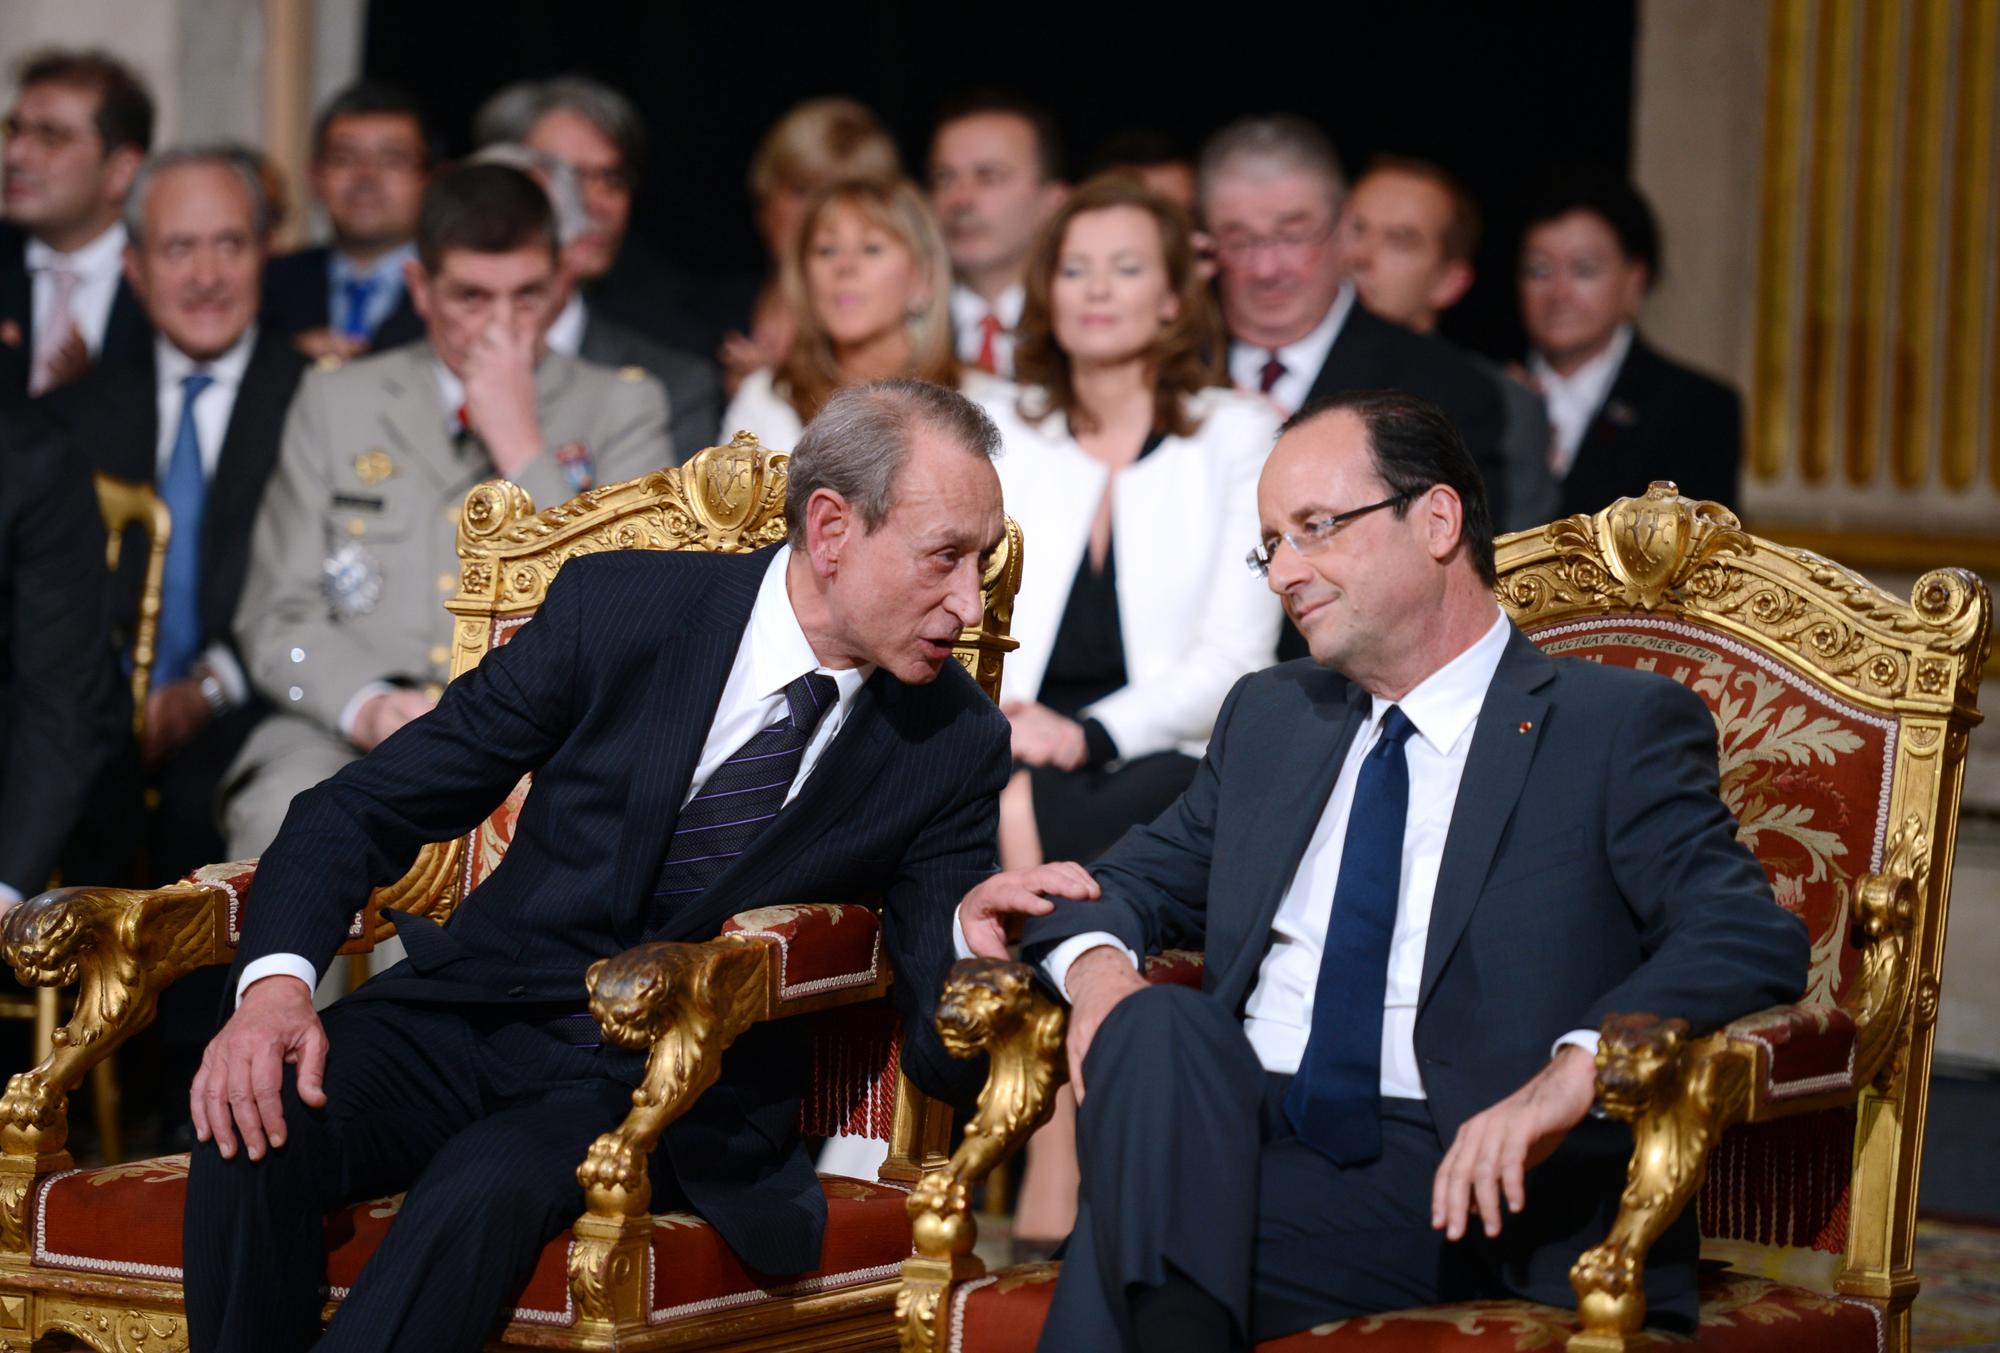 FRANCE, Paris : French president Francois Hollande (R) speaks with Paris' mayor Bertrand Delanoe (L) prior to his swearing-in ceremony on May 15, 2012 at the Elysee presidential Palace in Paris. AFP PHOTO / POOL / PHILIPPE DESMAZES [AFP - Philippe Desmazes]